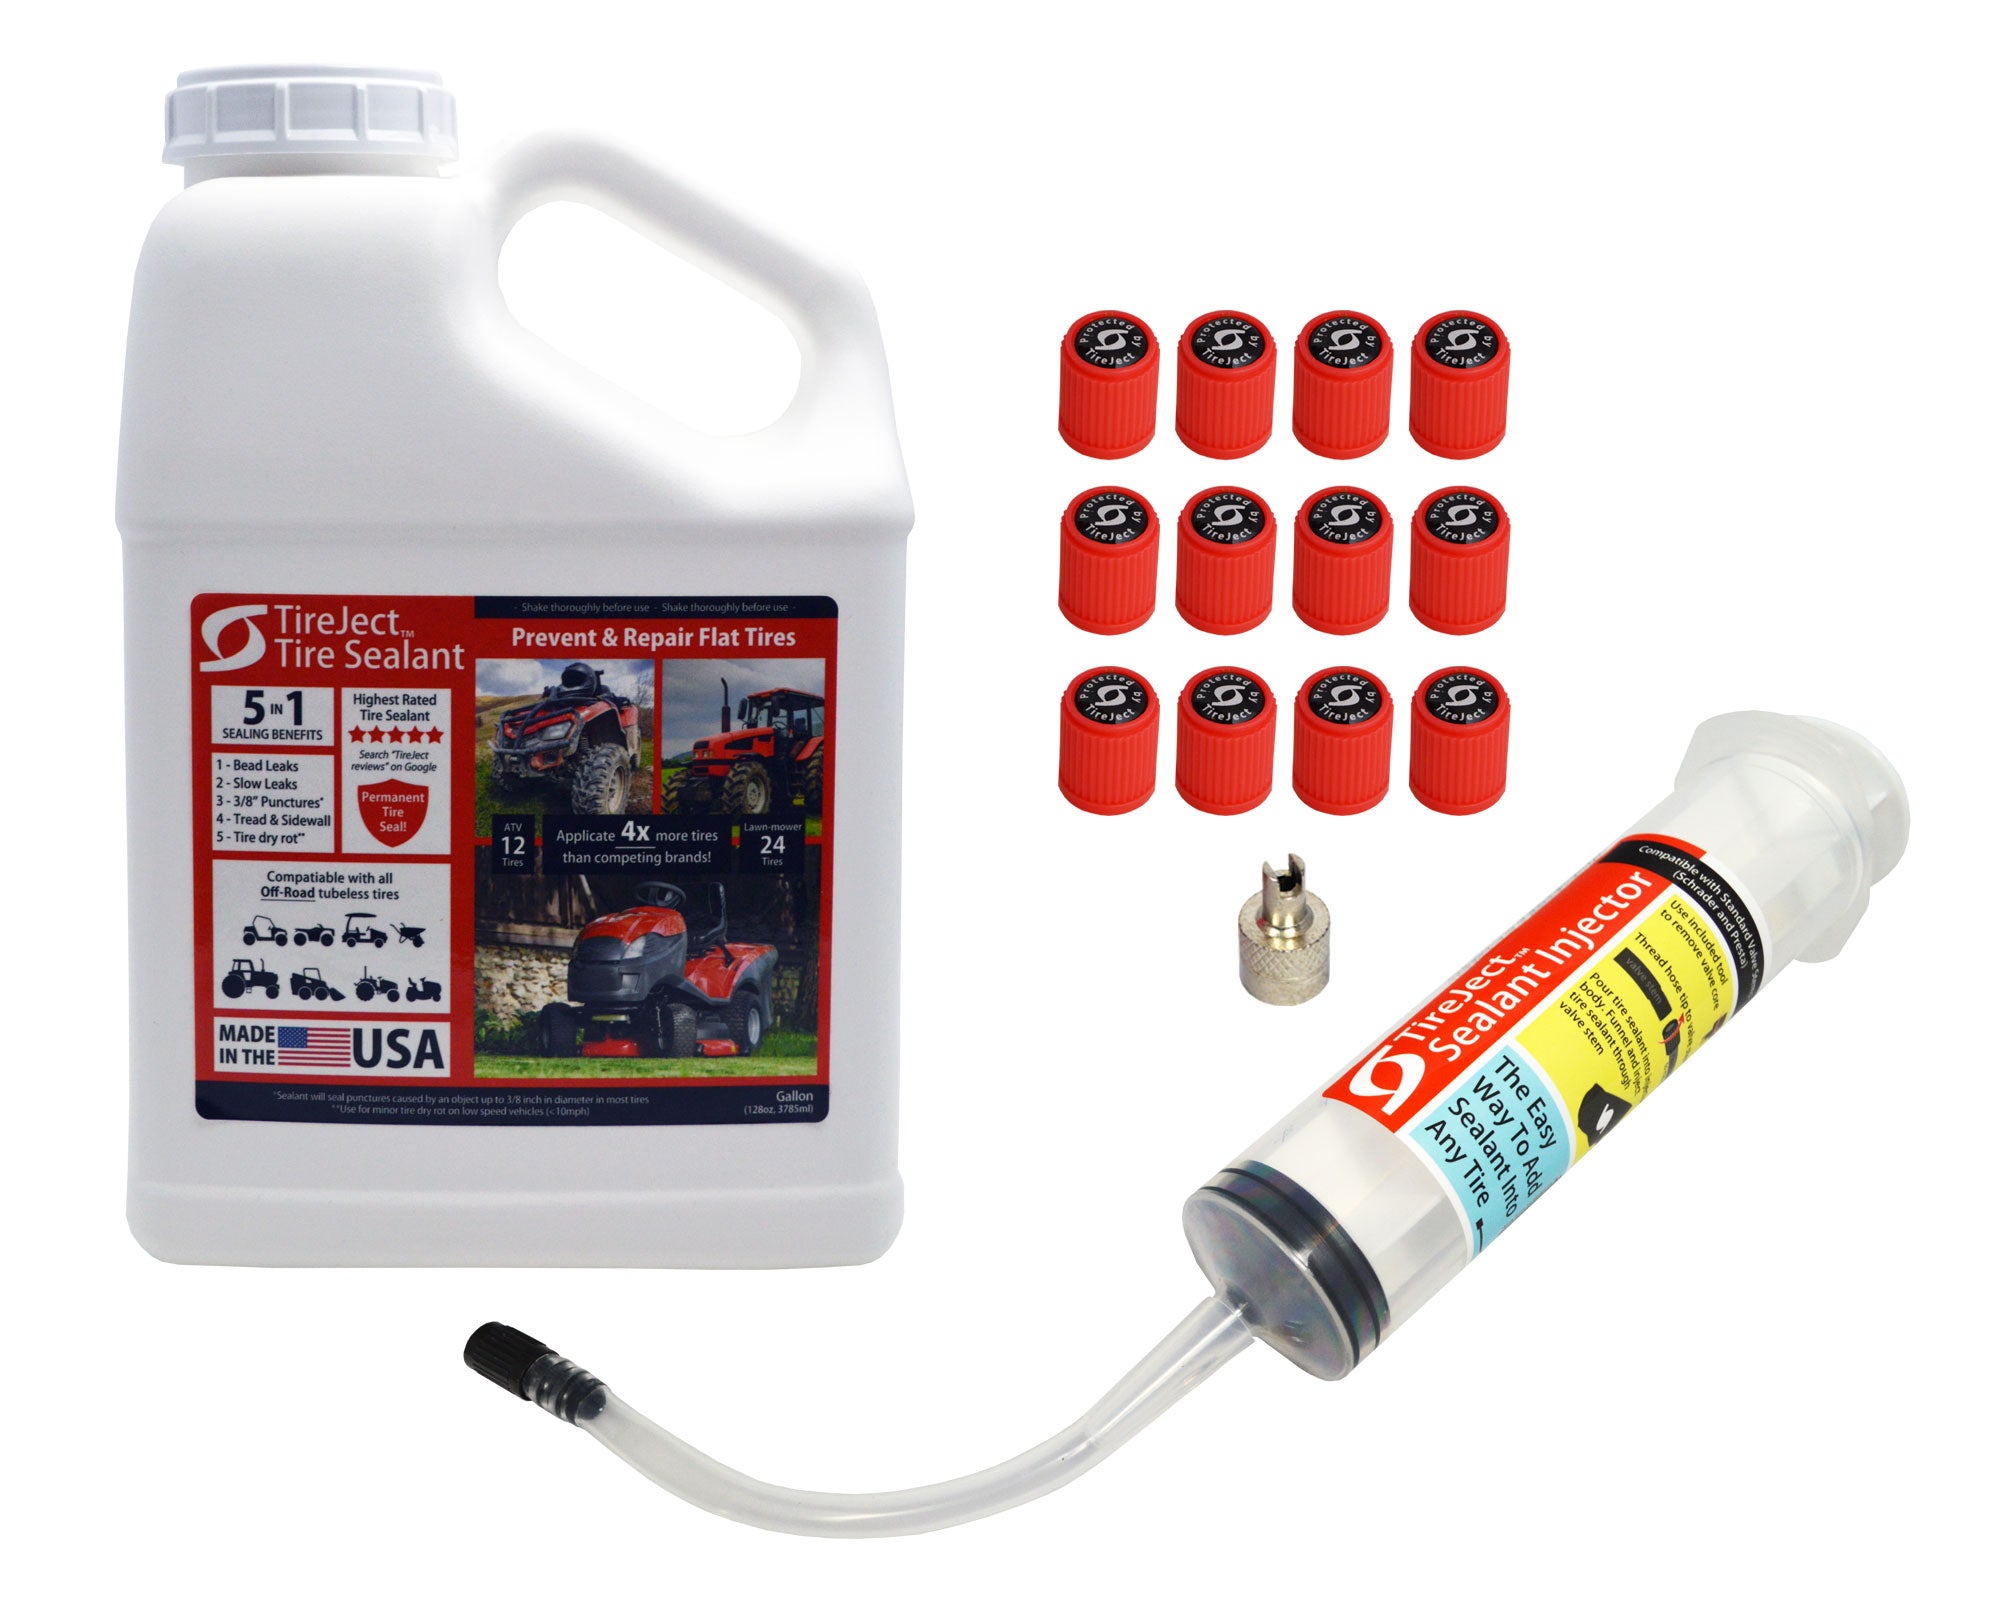 TireJect Automotive Sedan/Crossover/Truck 2-in-1 Tire Sealant & Bead Sealer Kit for Tire Repair of Leaks and Punctures